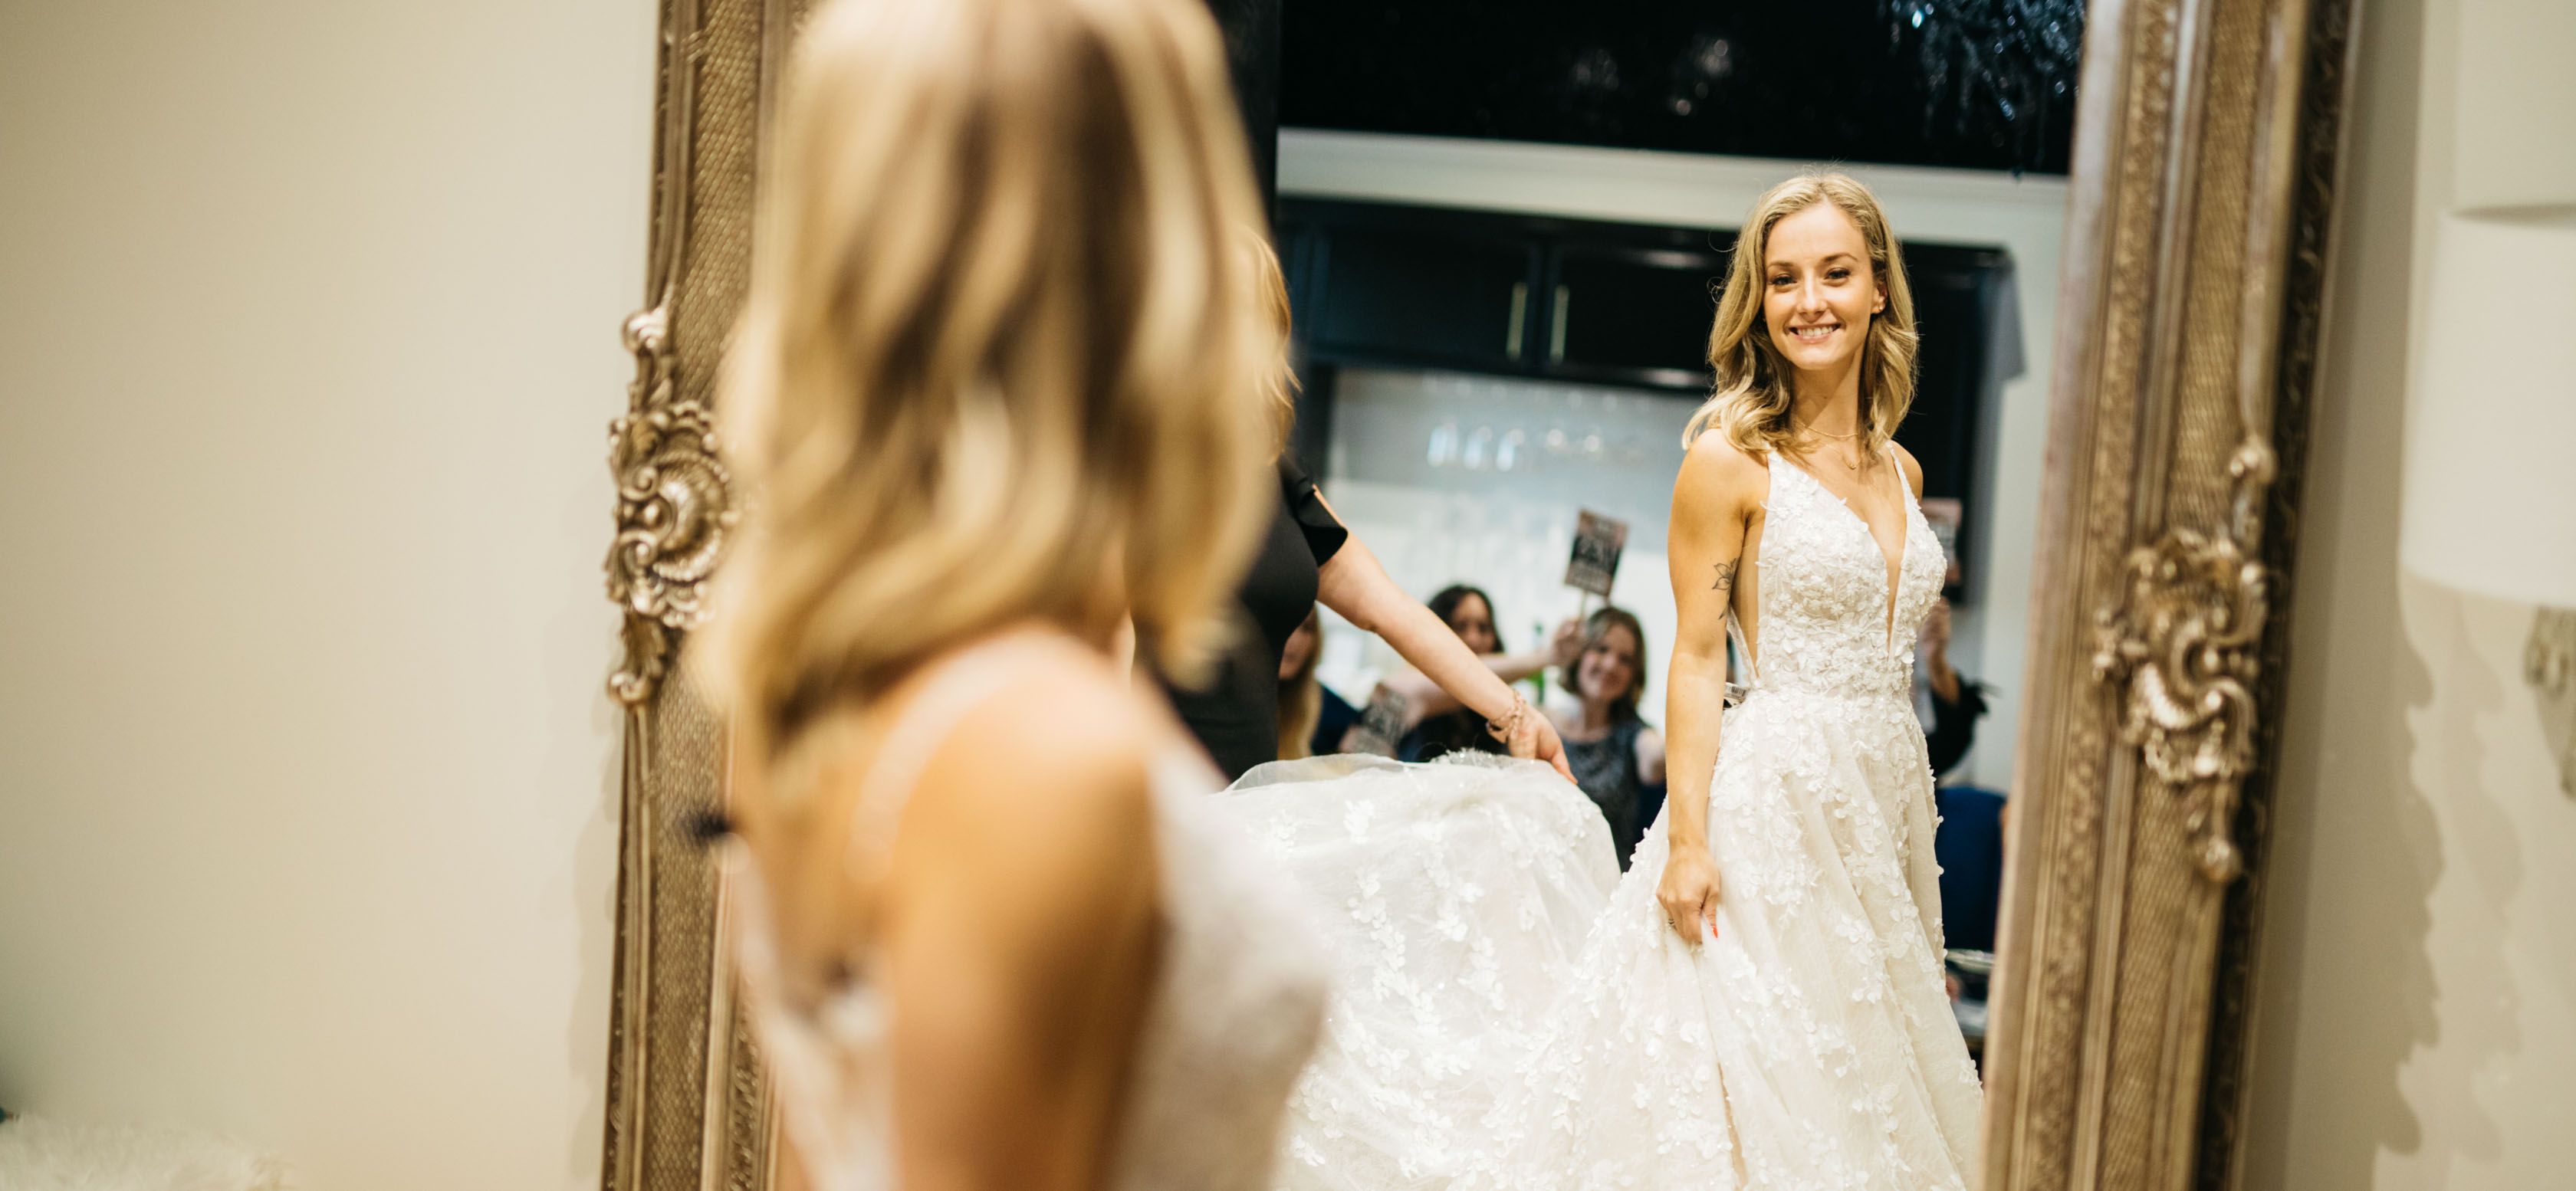 A bride looking at herself in the mirror trying on a dress.